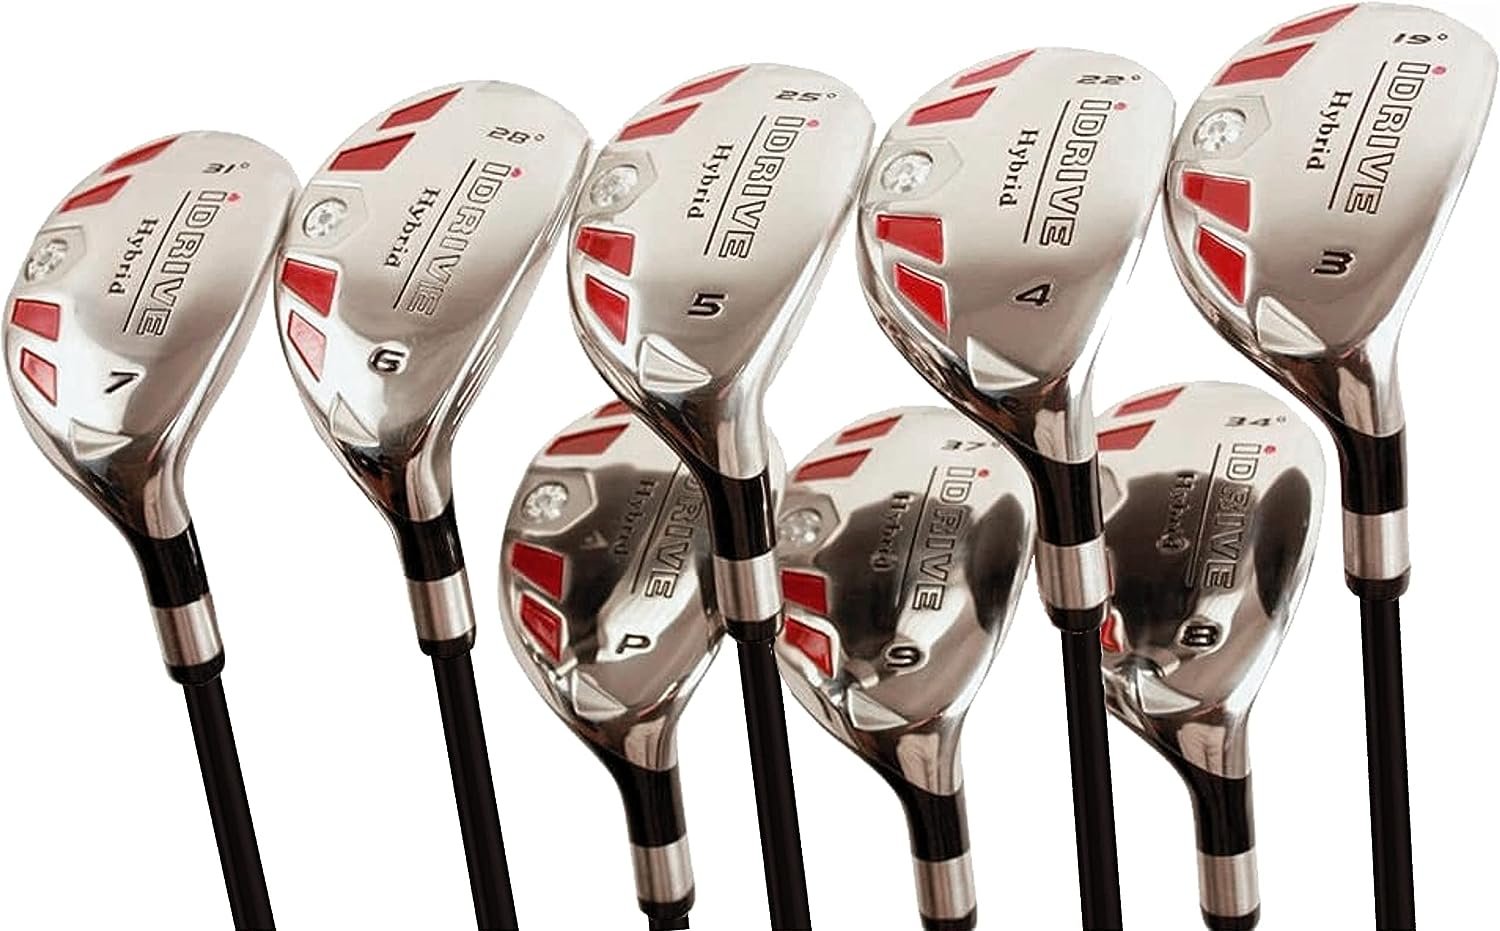 iDrive Hybrids Senior Men’s Golf All Complete Full Set, which Includes: #3, 4, 5, 6, 7, 8, 9, PW Senior Flex with Premium Arthritic Grip Right Handed Utility “A” Flex Clubs